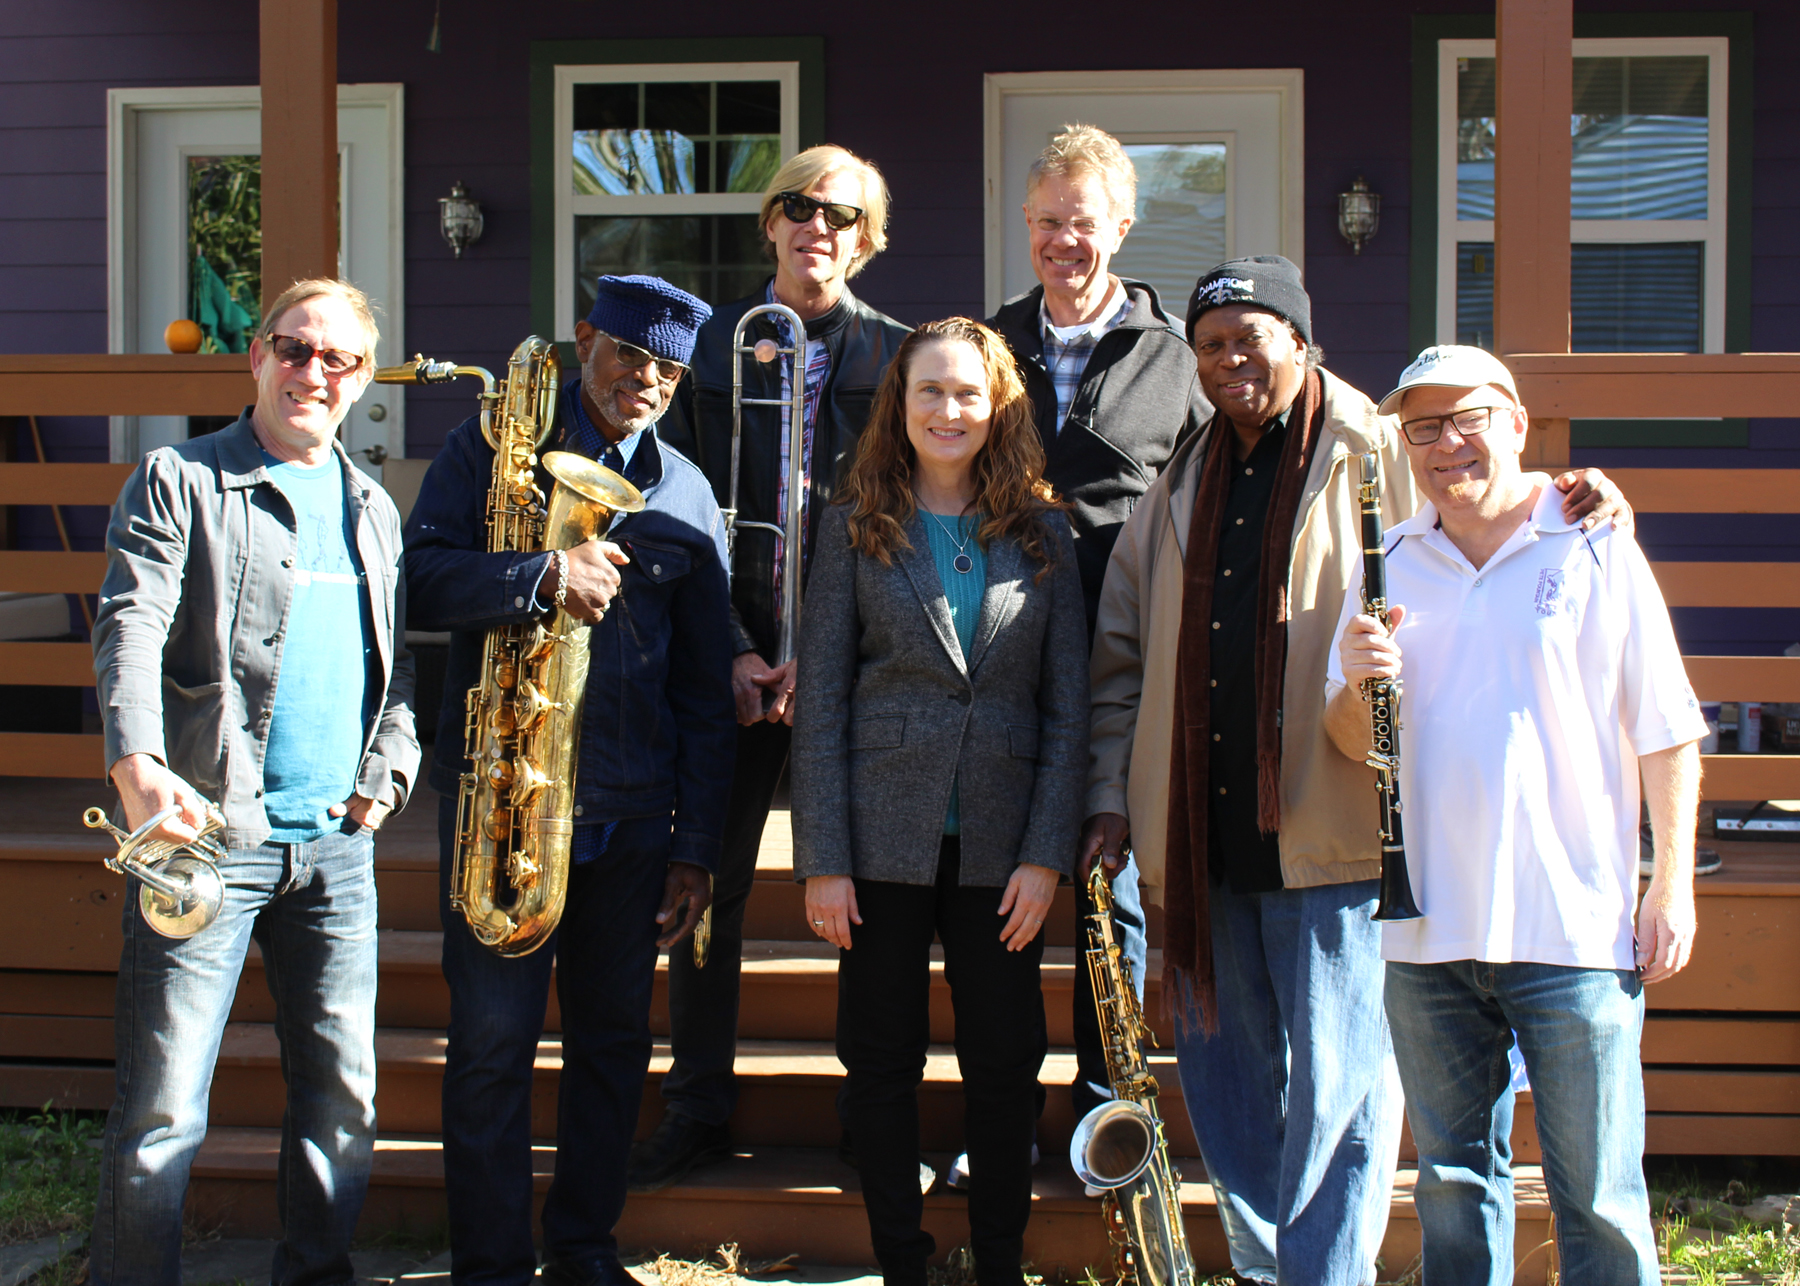 New Orleans is a Horn Players' Town! — Johnette & Scott